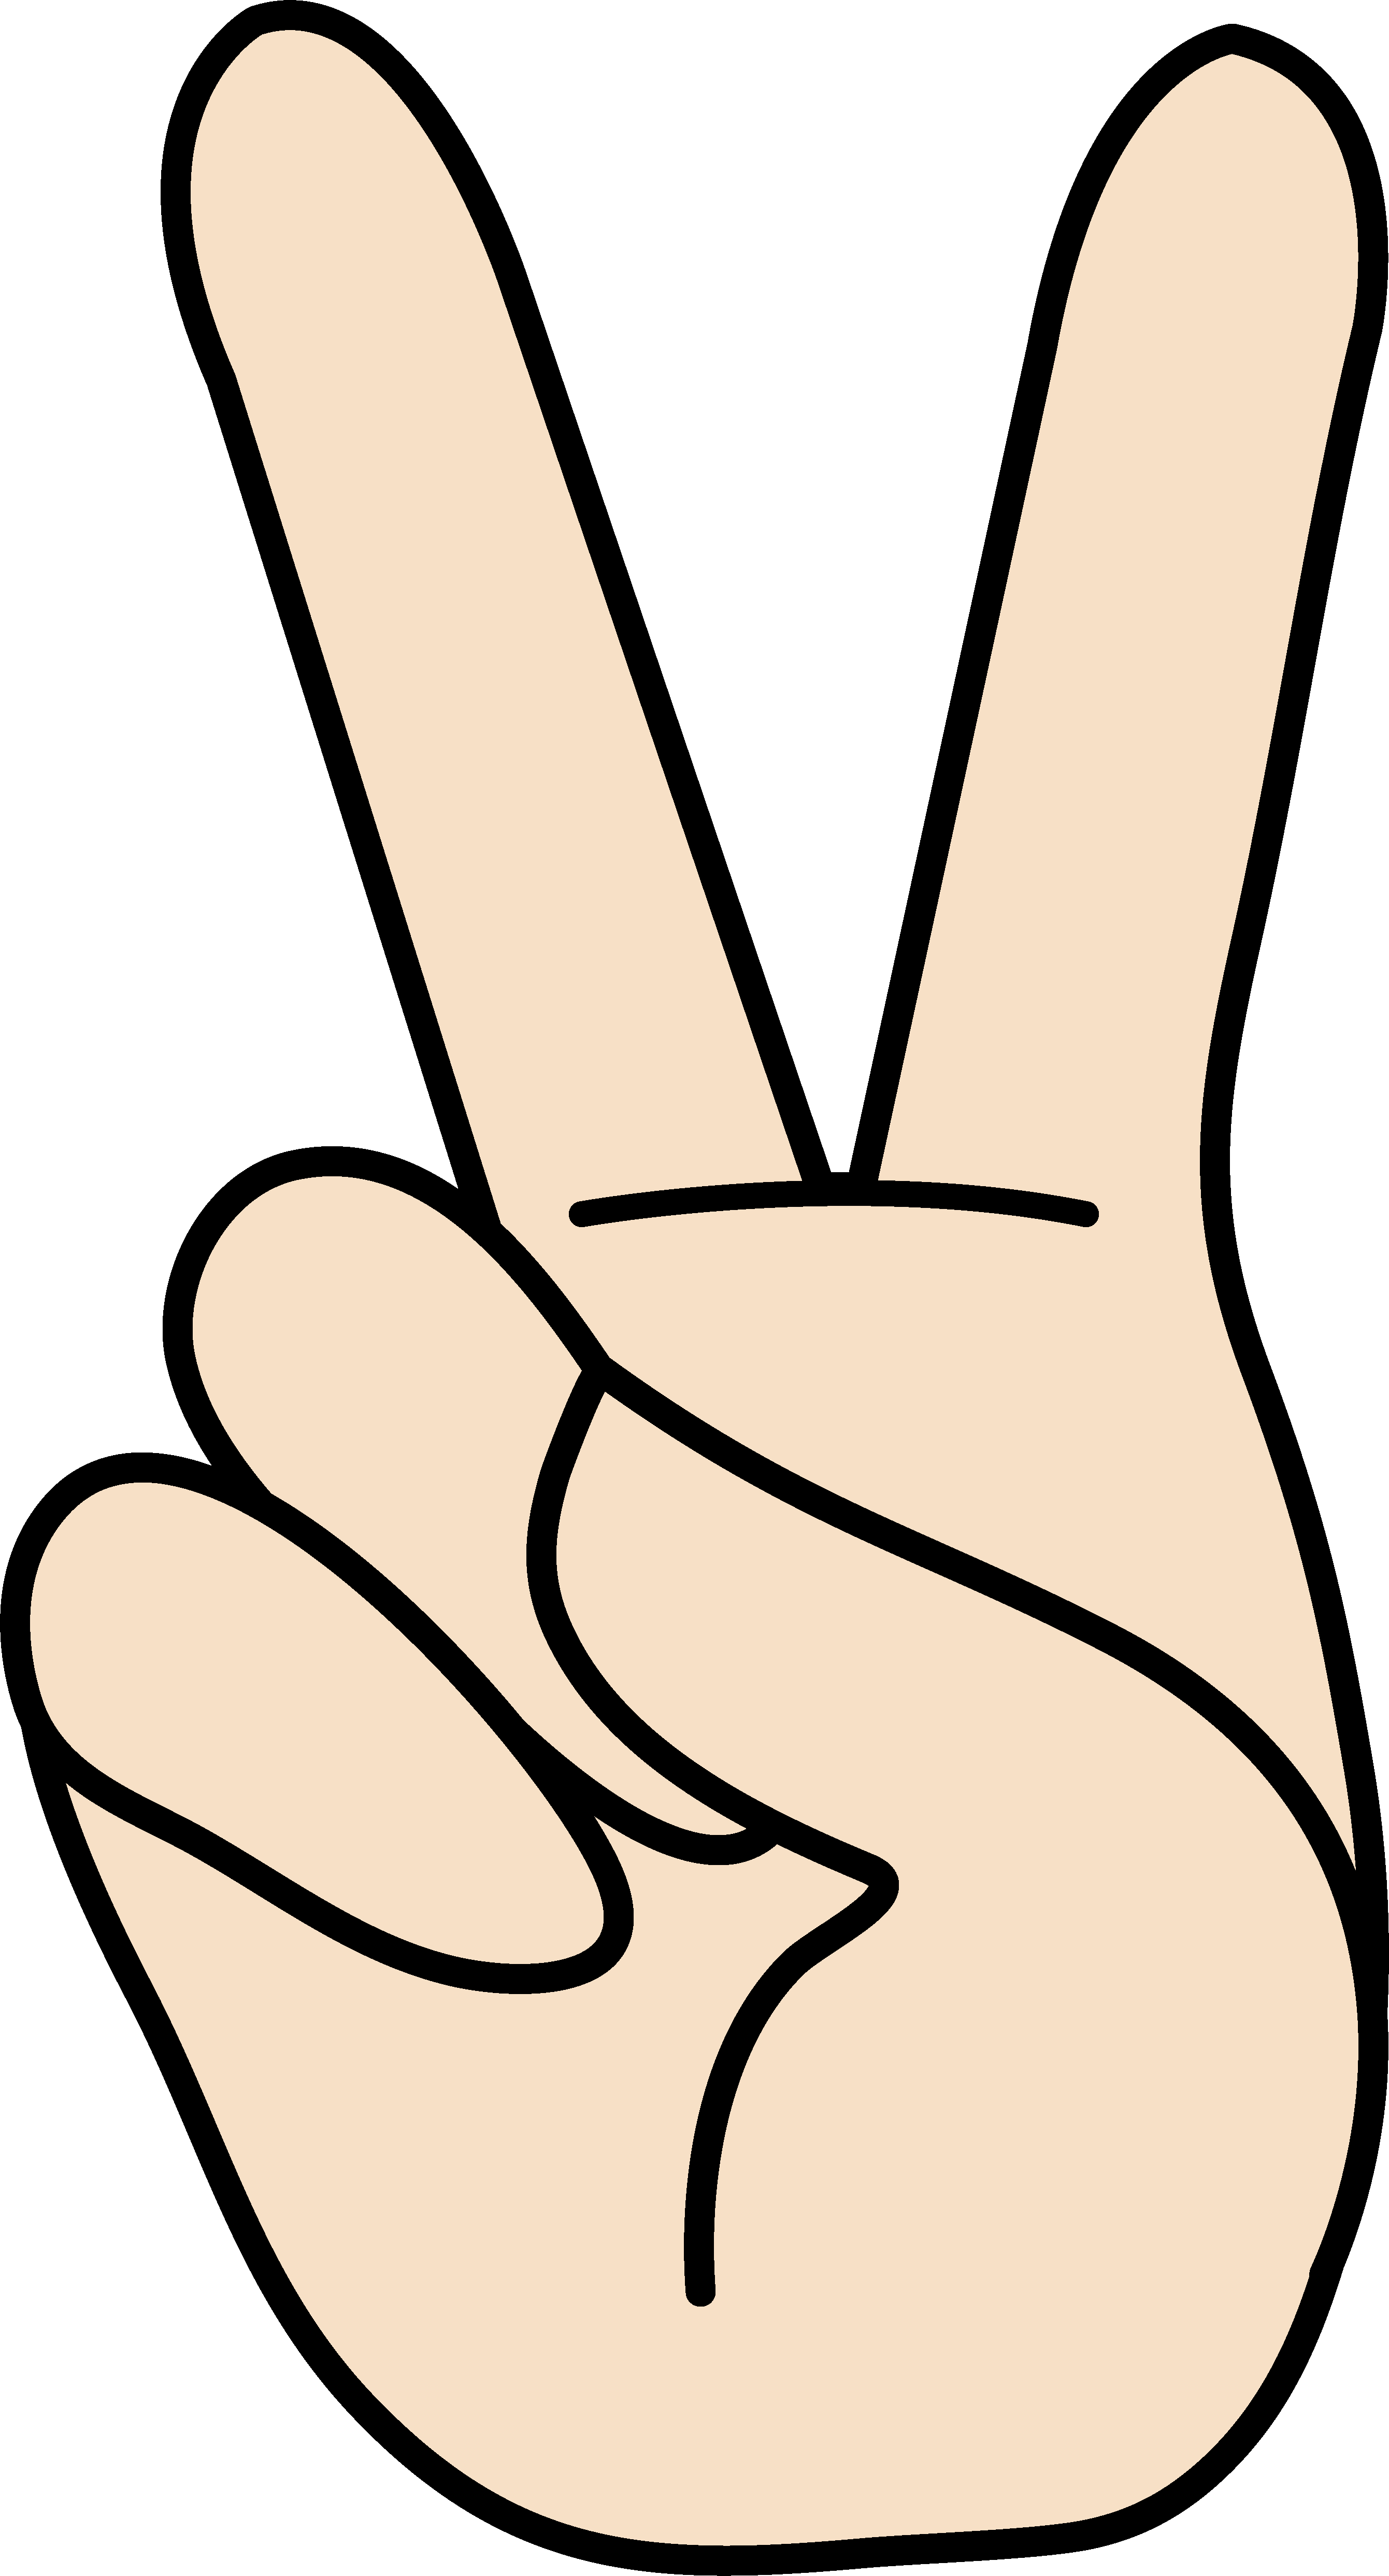 Hand sign free clip. Hands clipart peace